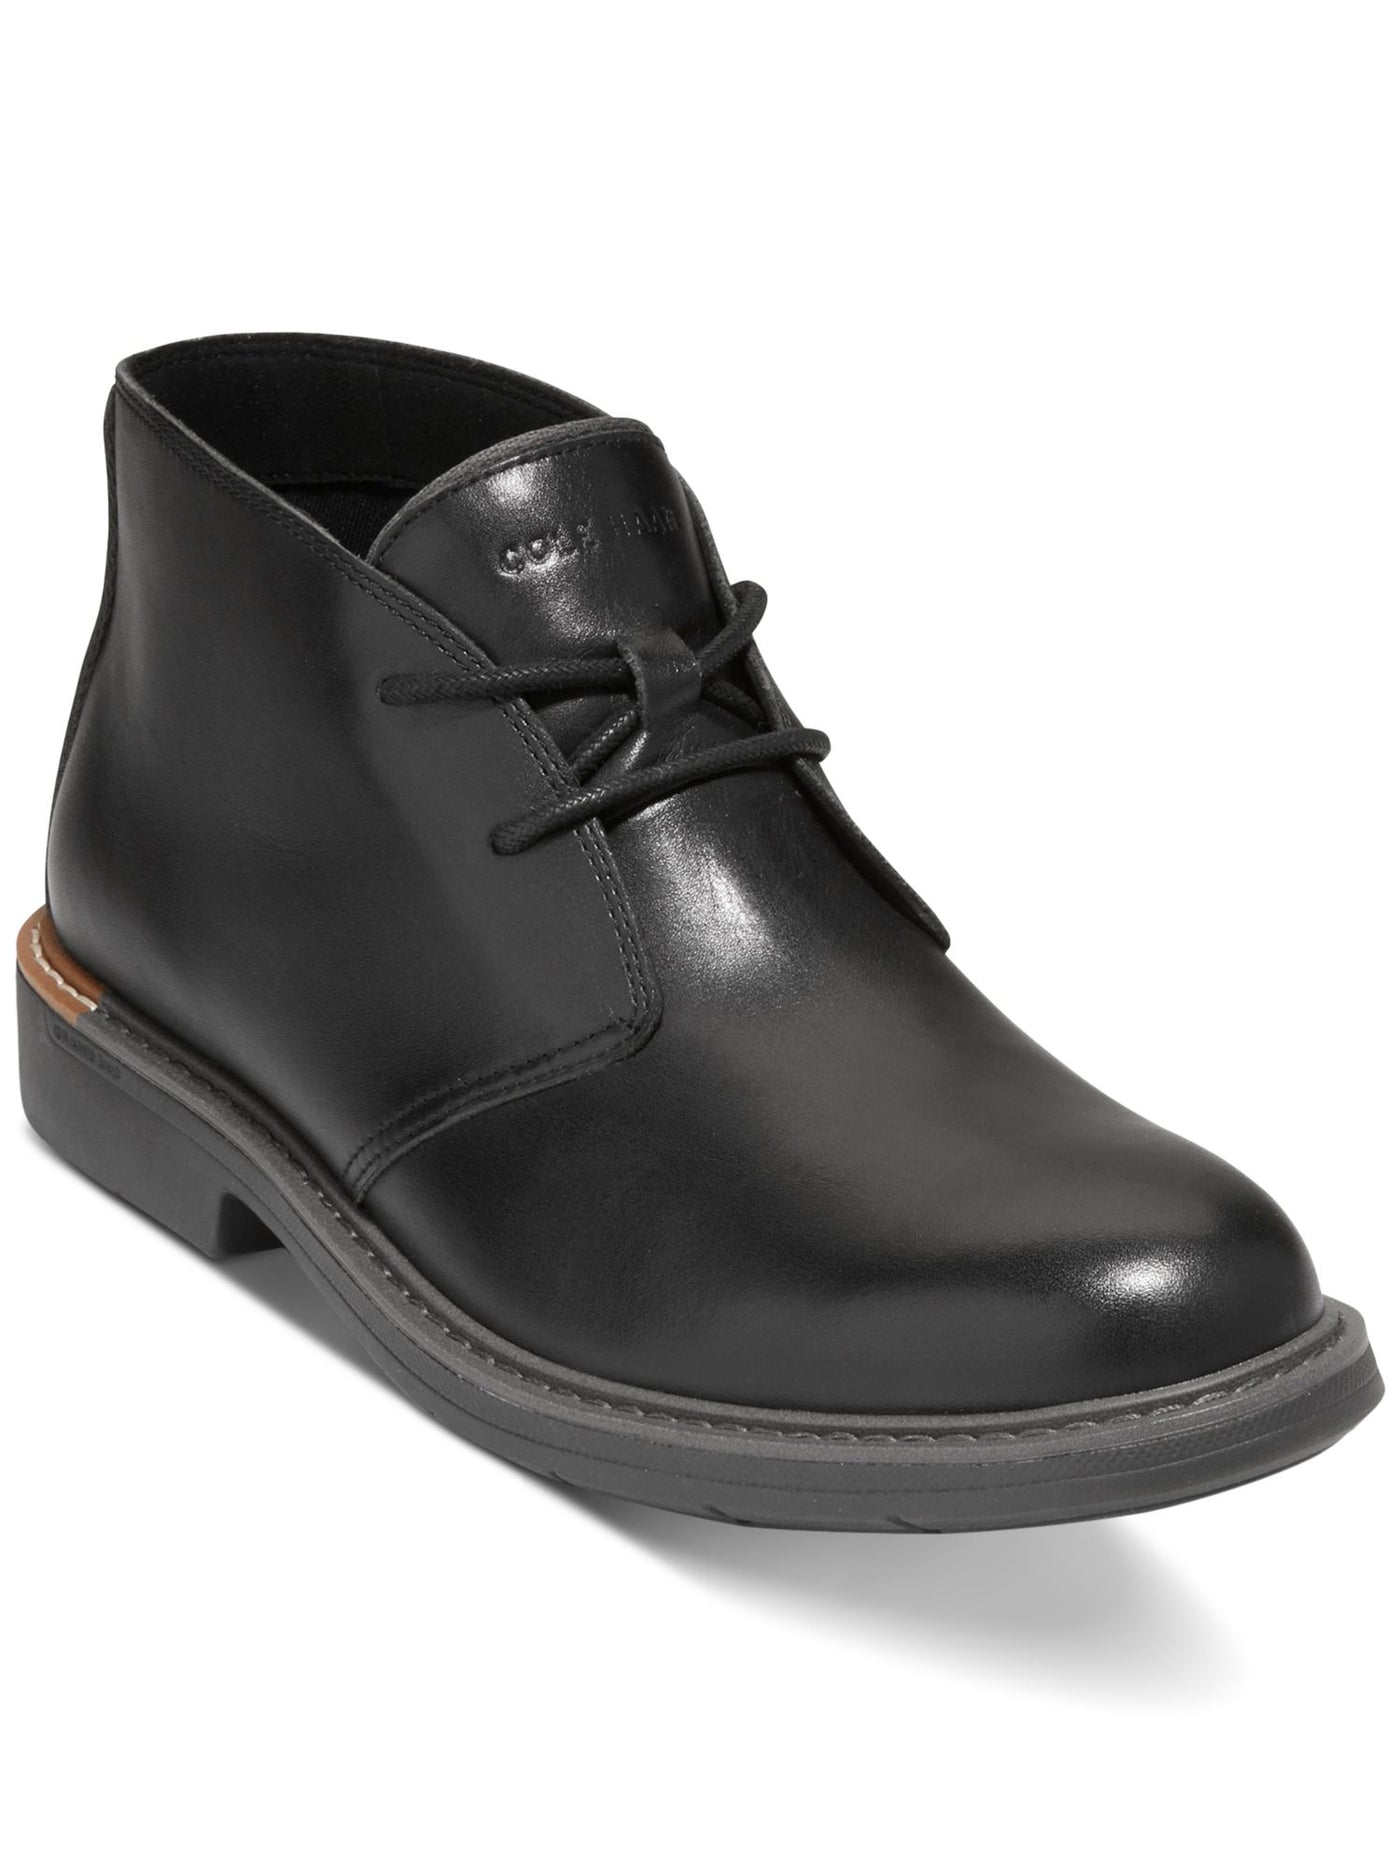 COLE HAAN GRANDSERIES Mens Black Cushioned Lightweight Go-to Round Toe Block Heel Lace-Up Leather Chukka Boots 11.5 M